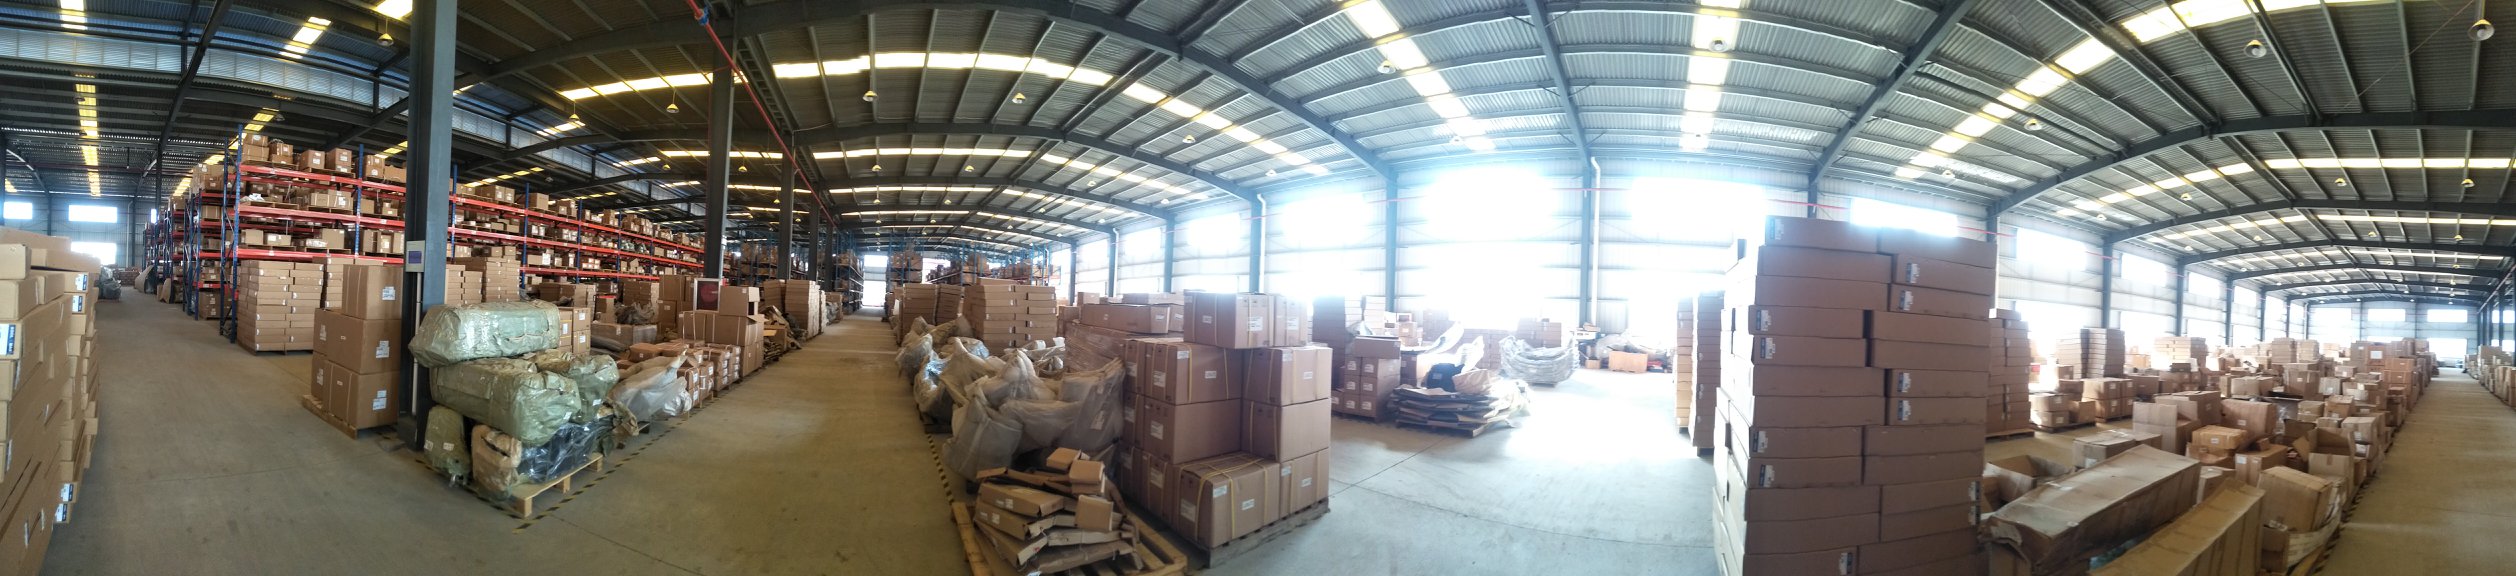 Warehouse Inside View2